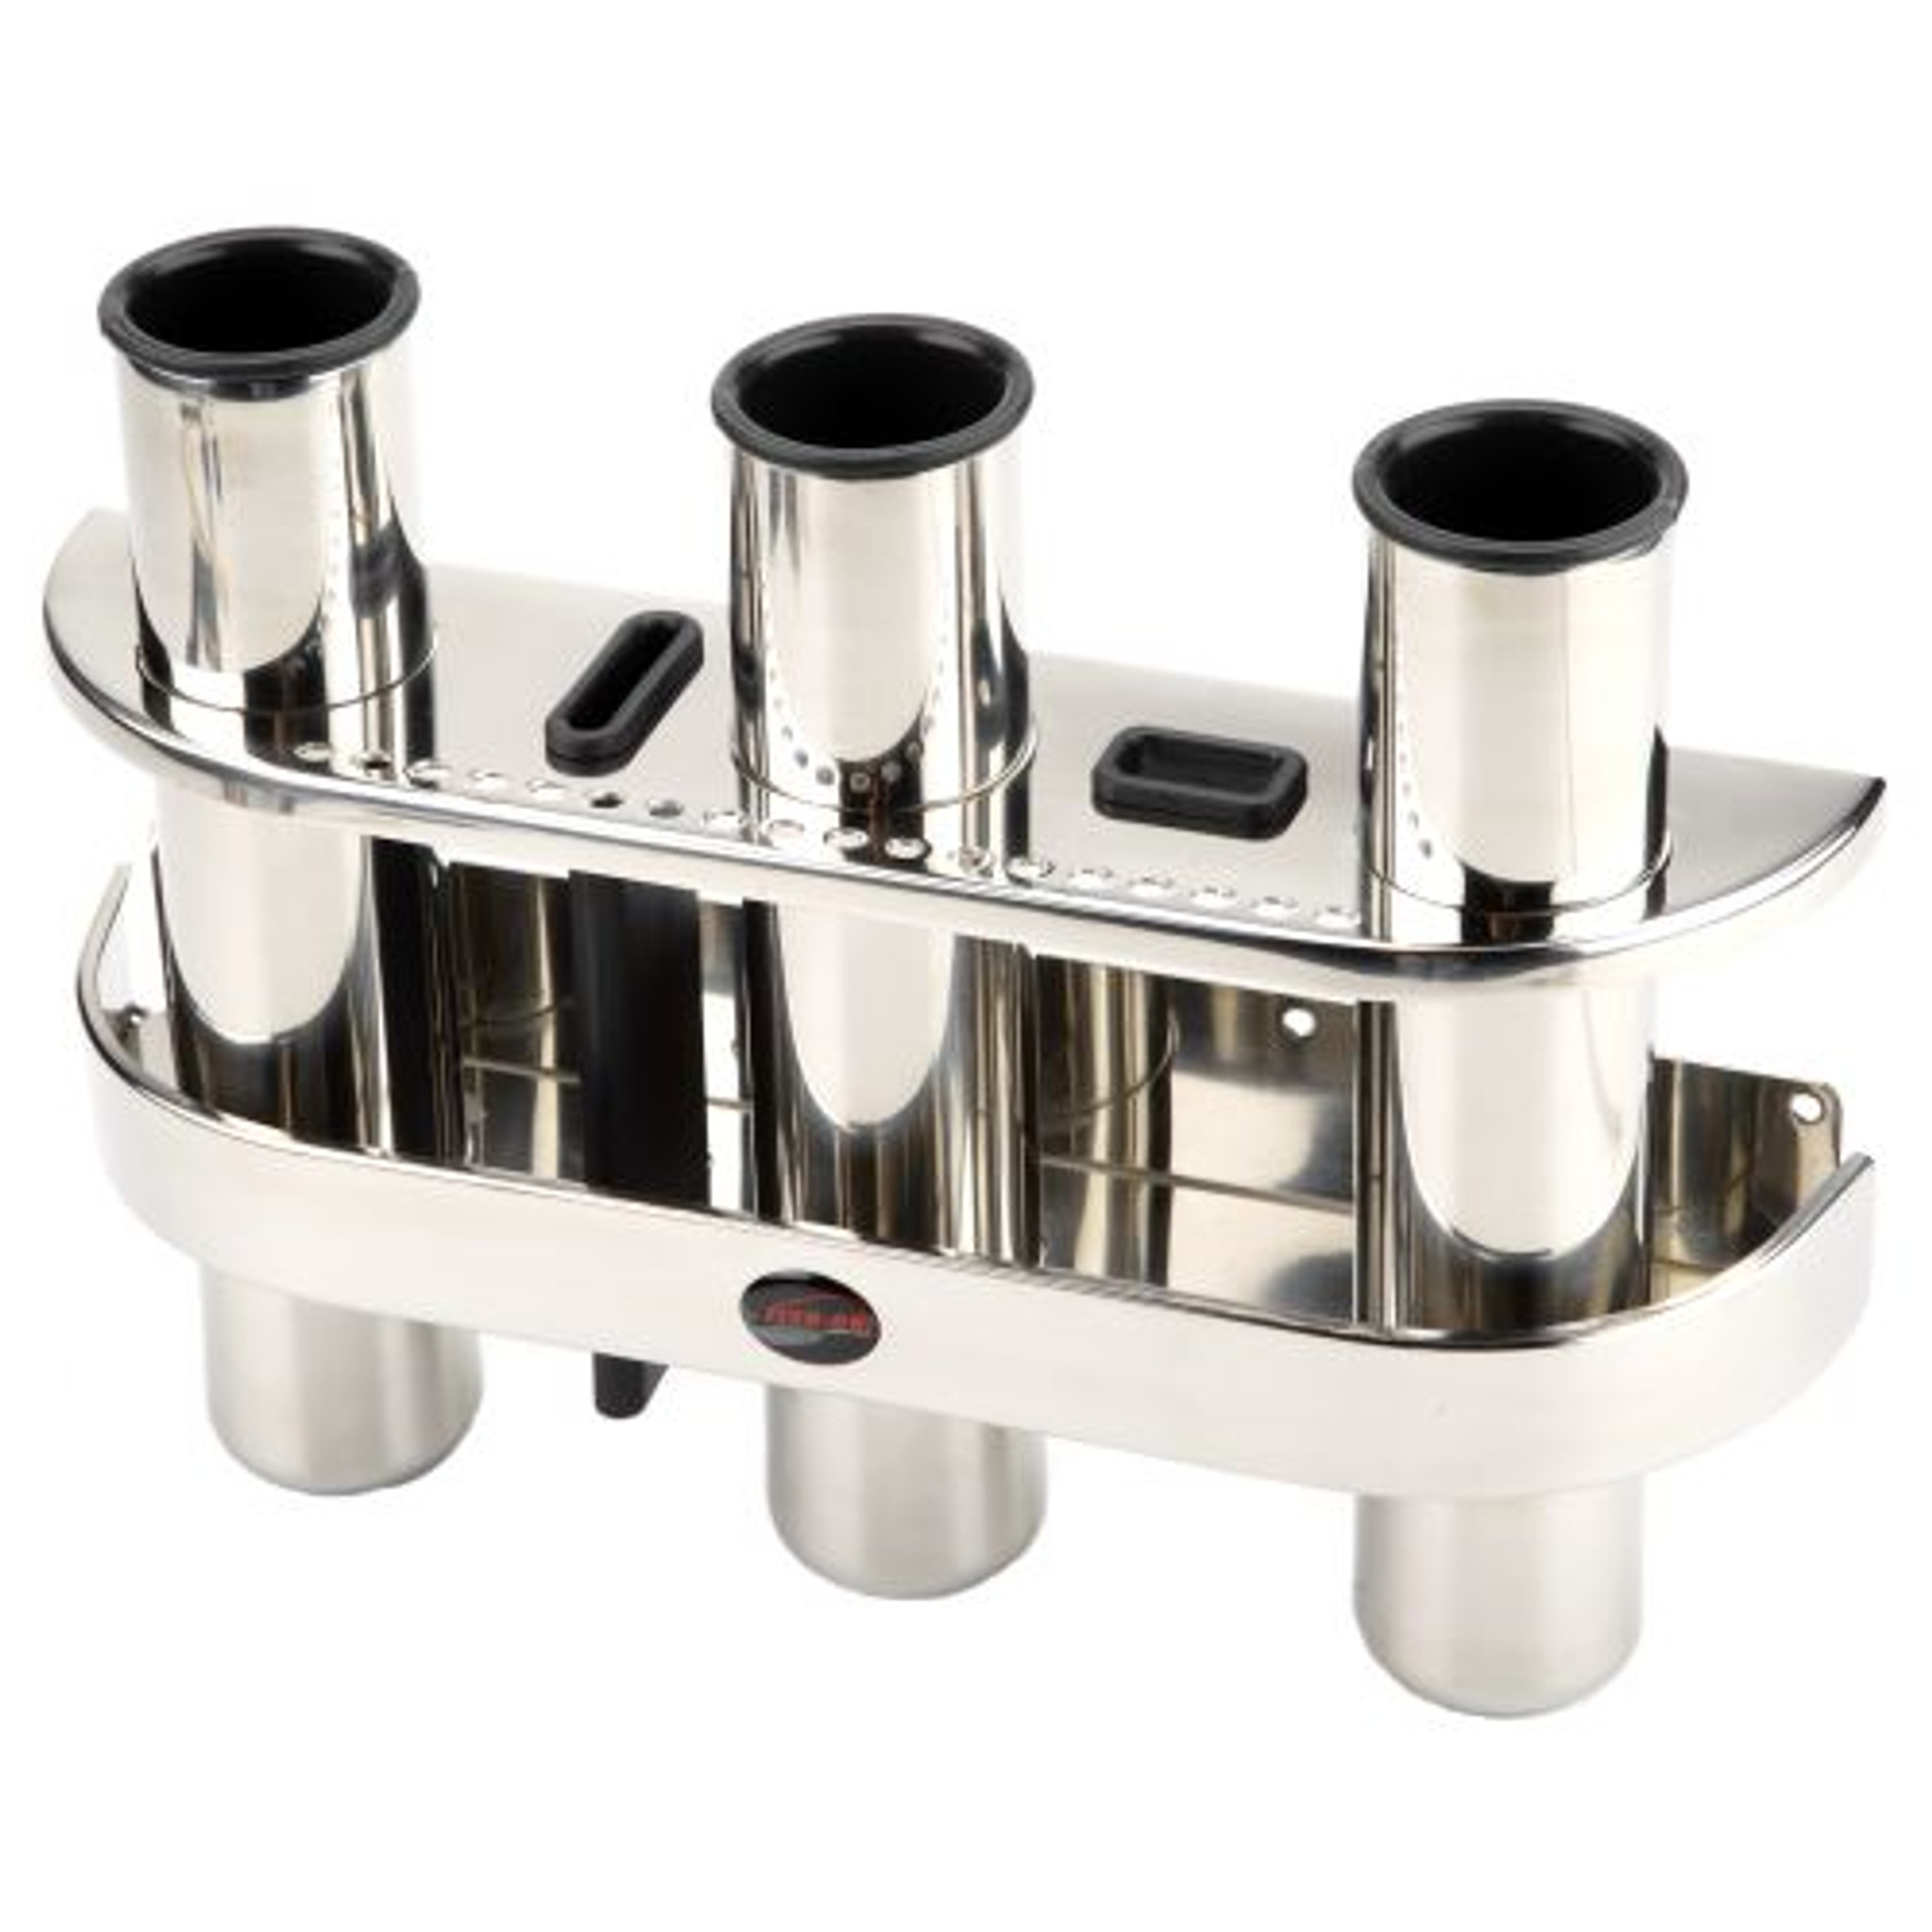 Stainless-Steel Triple Rod Holder - Sea Pro Boat Parts